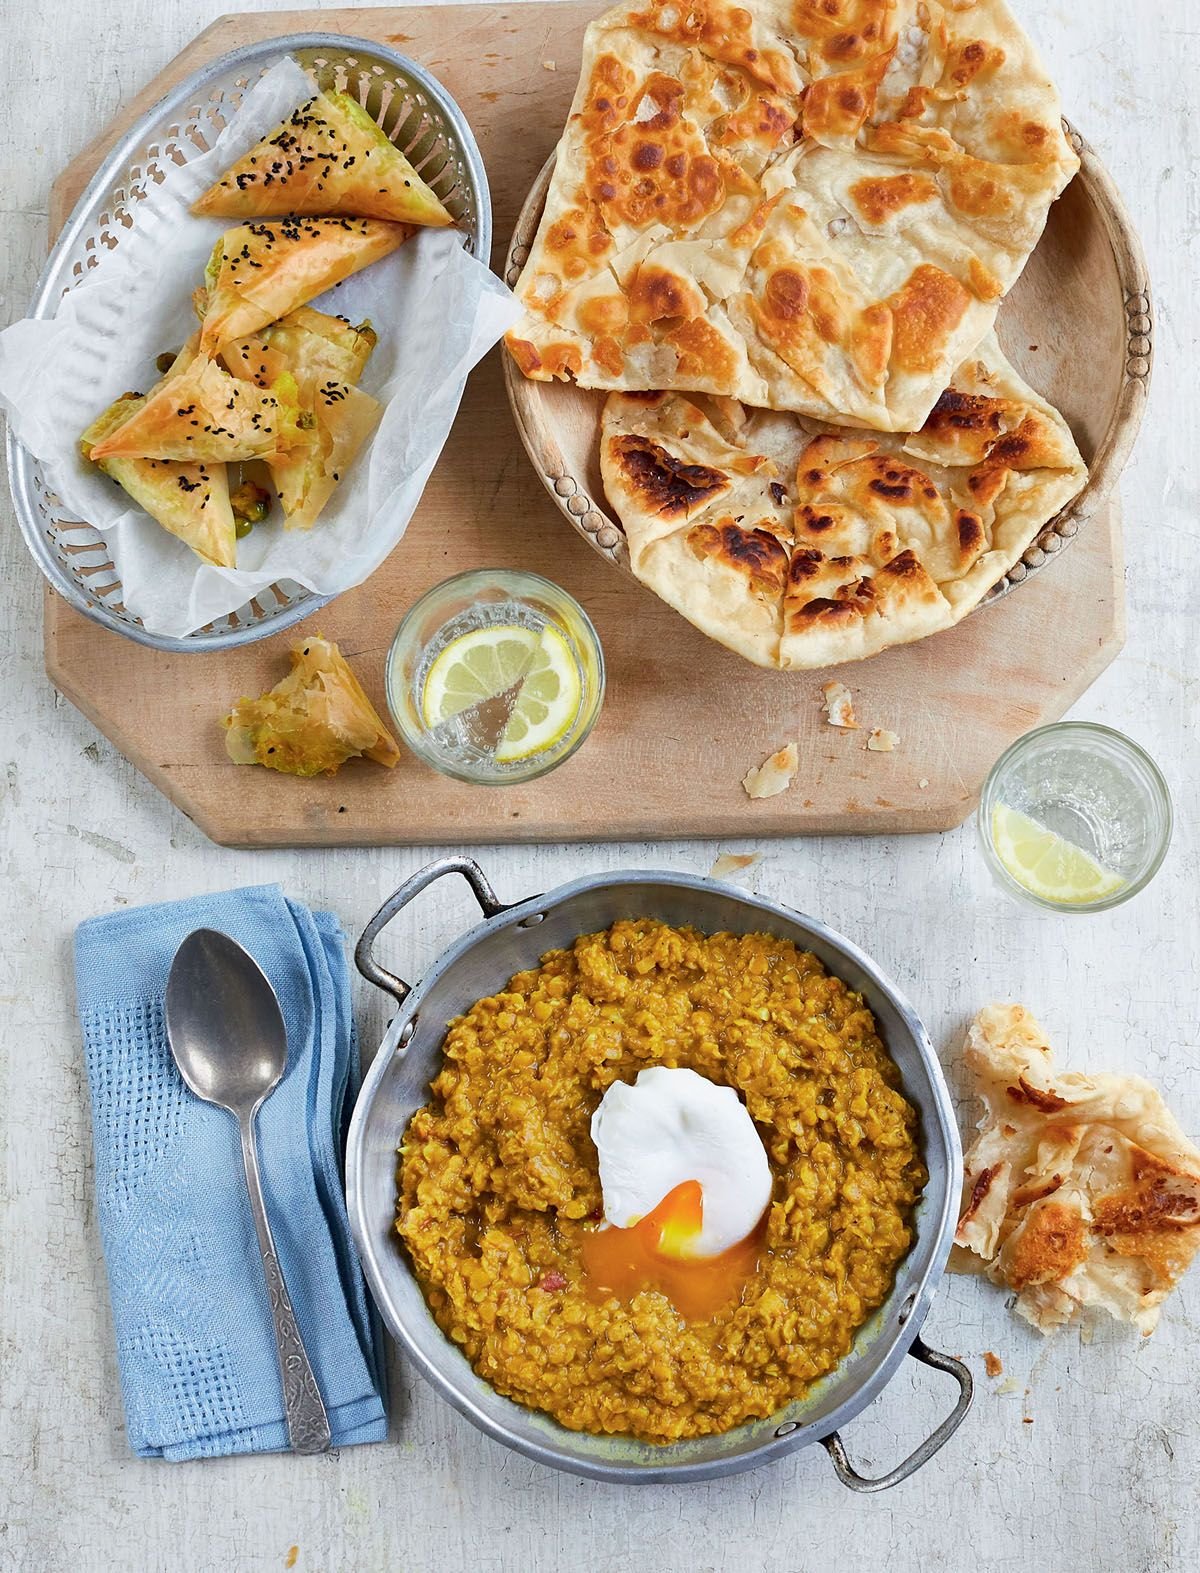 Lentil Dhal with Poached Eggs and Roti Canai